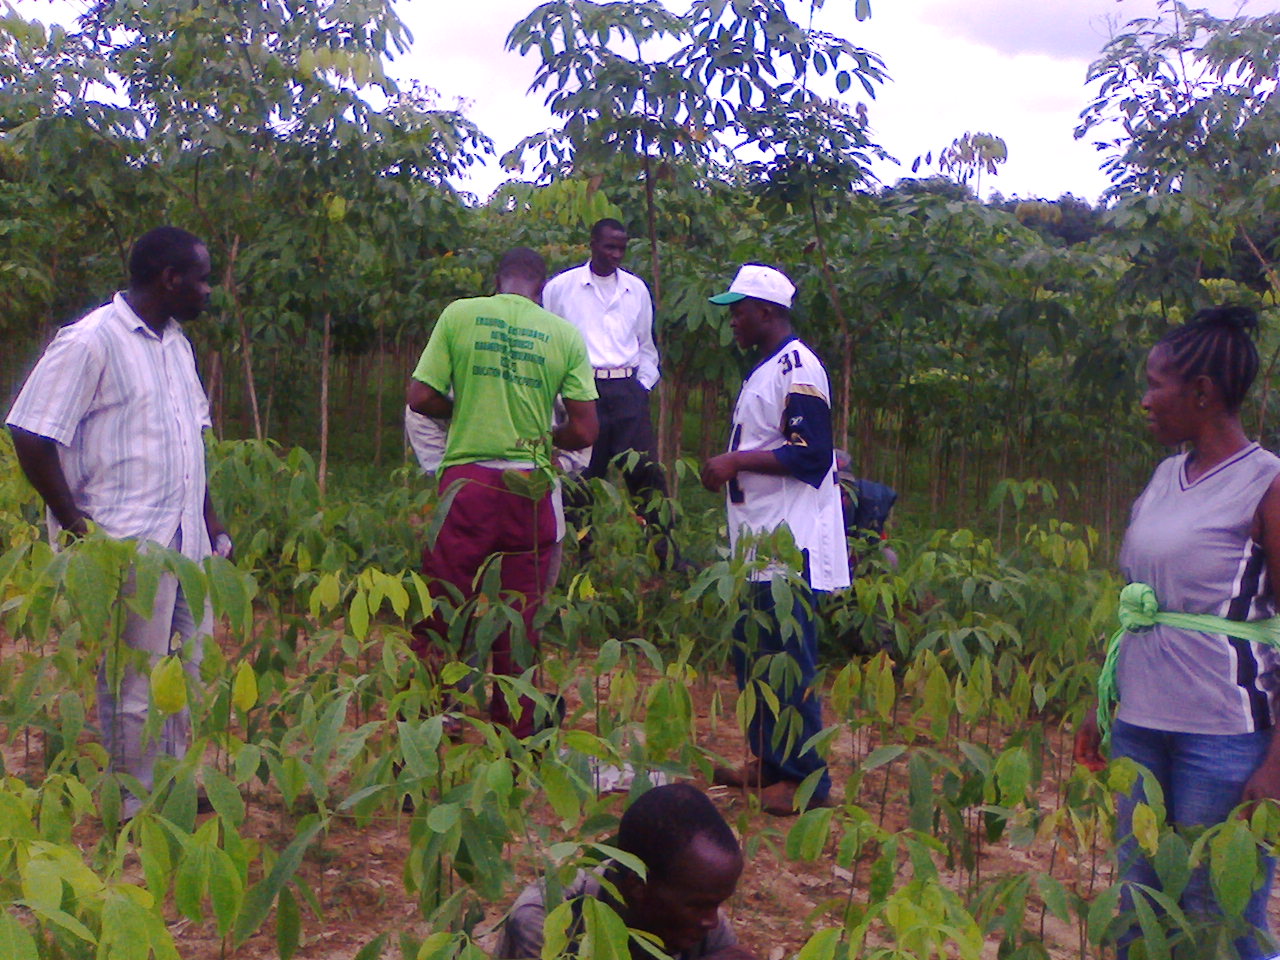 18 students of the Agriculture Department at the Nimba Commuinty College get practical knowledge about agriculture during a field trip to a rubber plantation in Nimba County